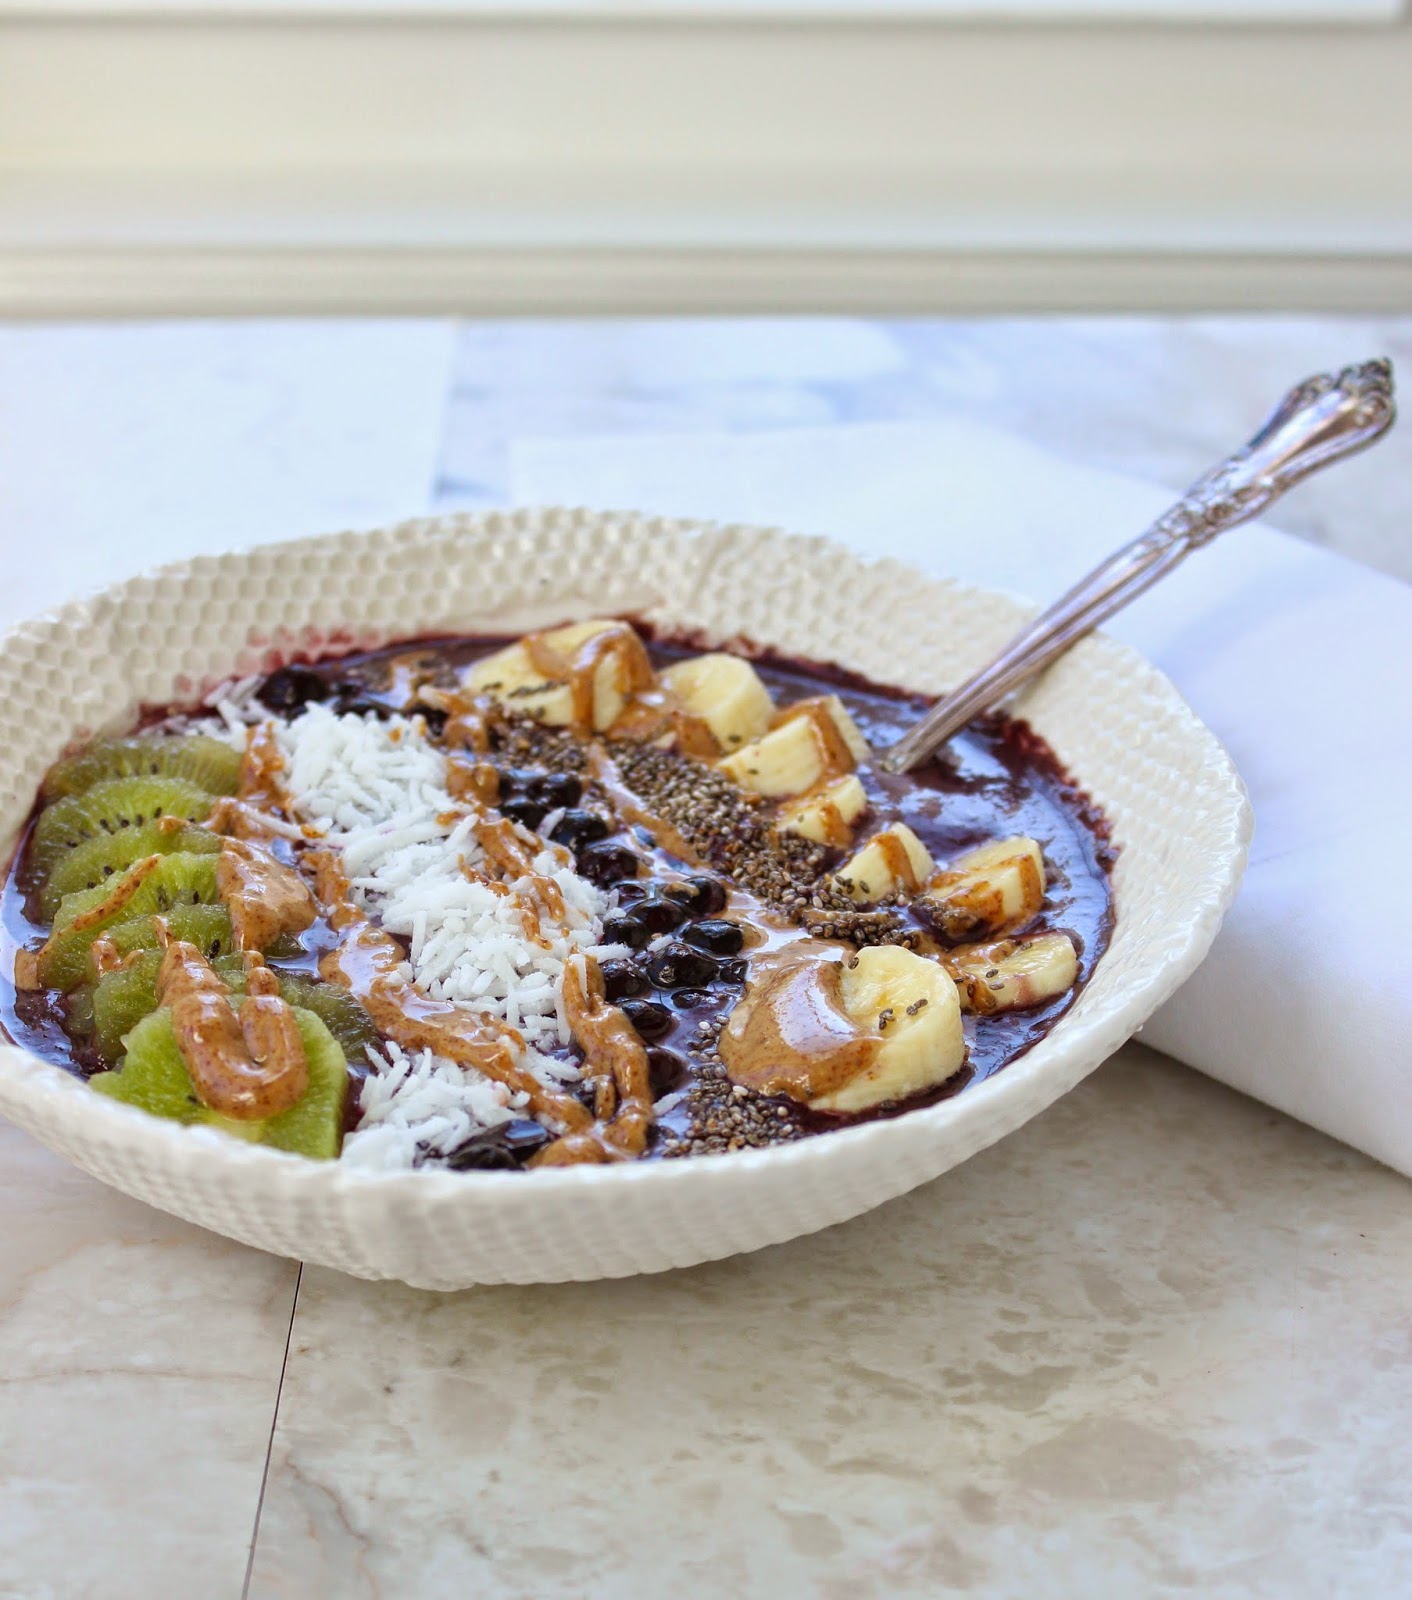 Stew or a Story: Acai Bowls with Wild Blueberries, Bananas, & Almond Butter